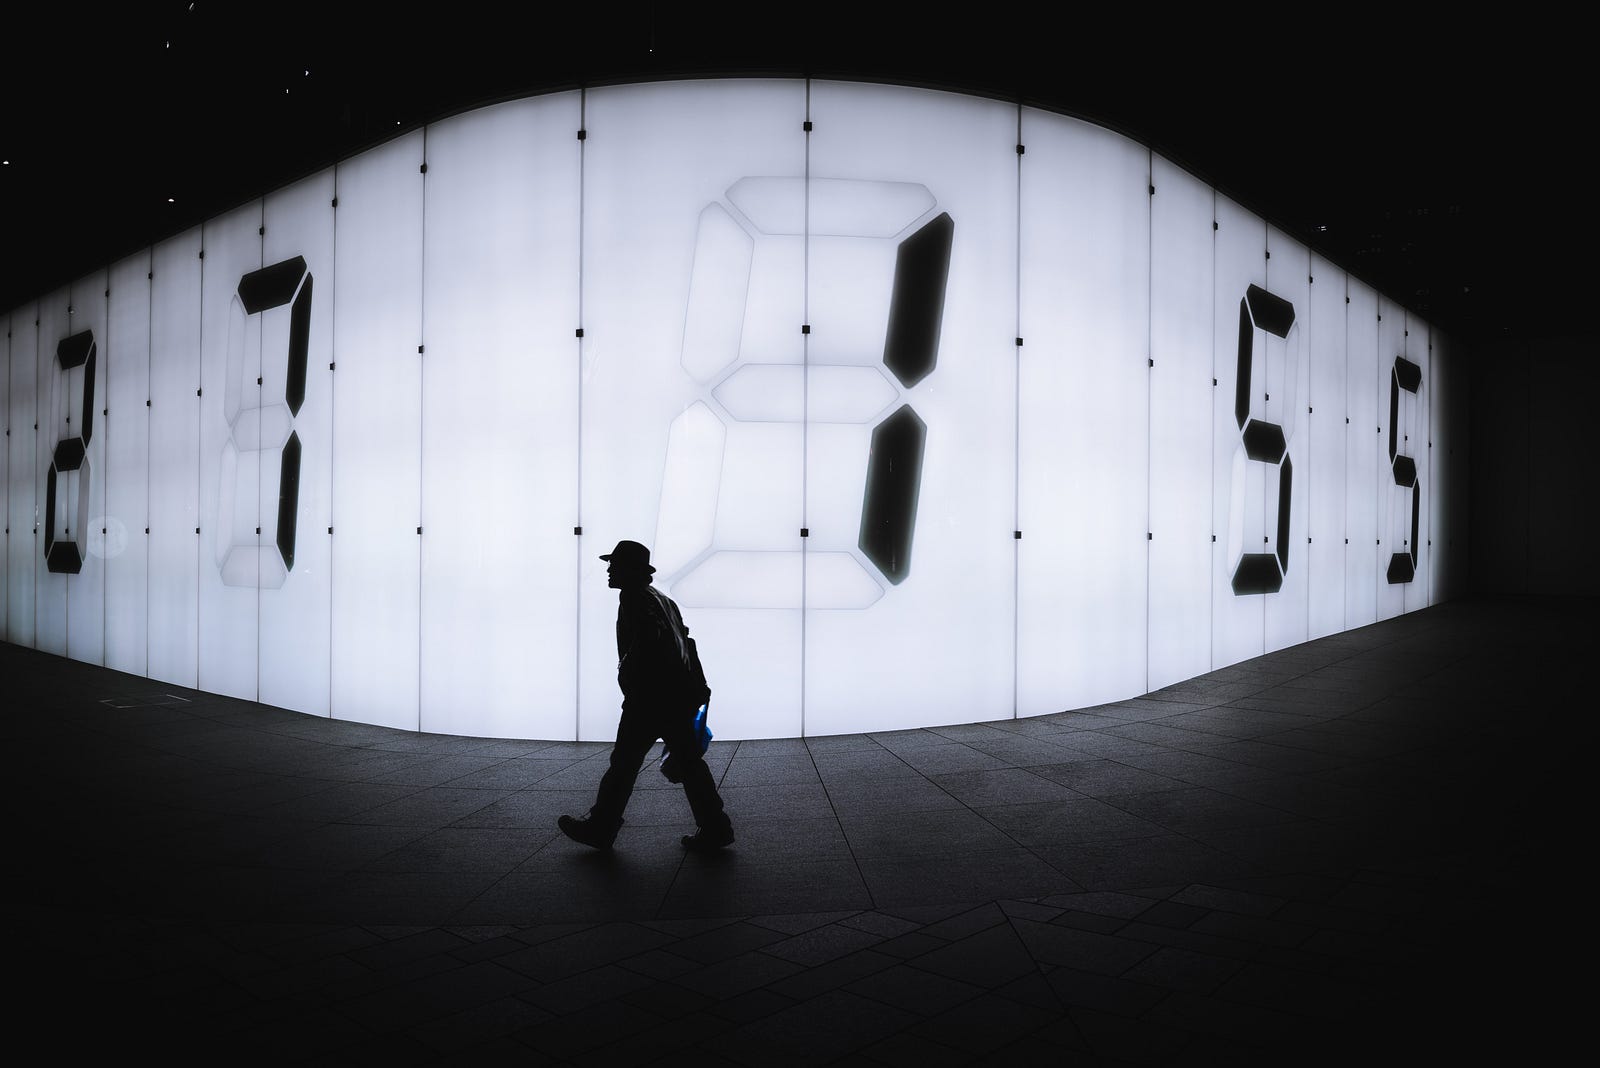 A black and white image of a solitary figure walking from right to left. There is a wall of numbers (white and backlit) in the background. A new study shows that, for cardiovascular disease, walking daily at least 2,337 steps reduced the risk, with each extra 500 daily steps associated with an additional seven percent relative reduction in risk.